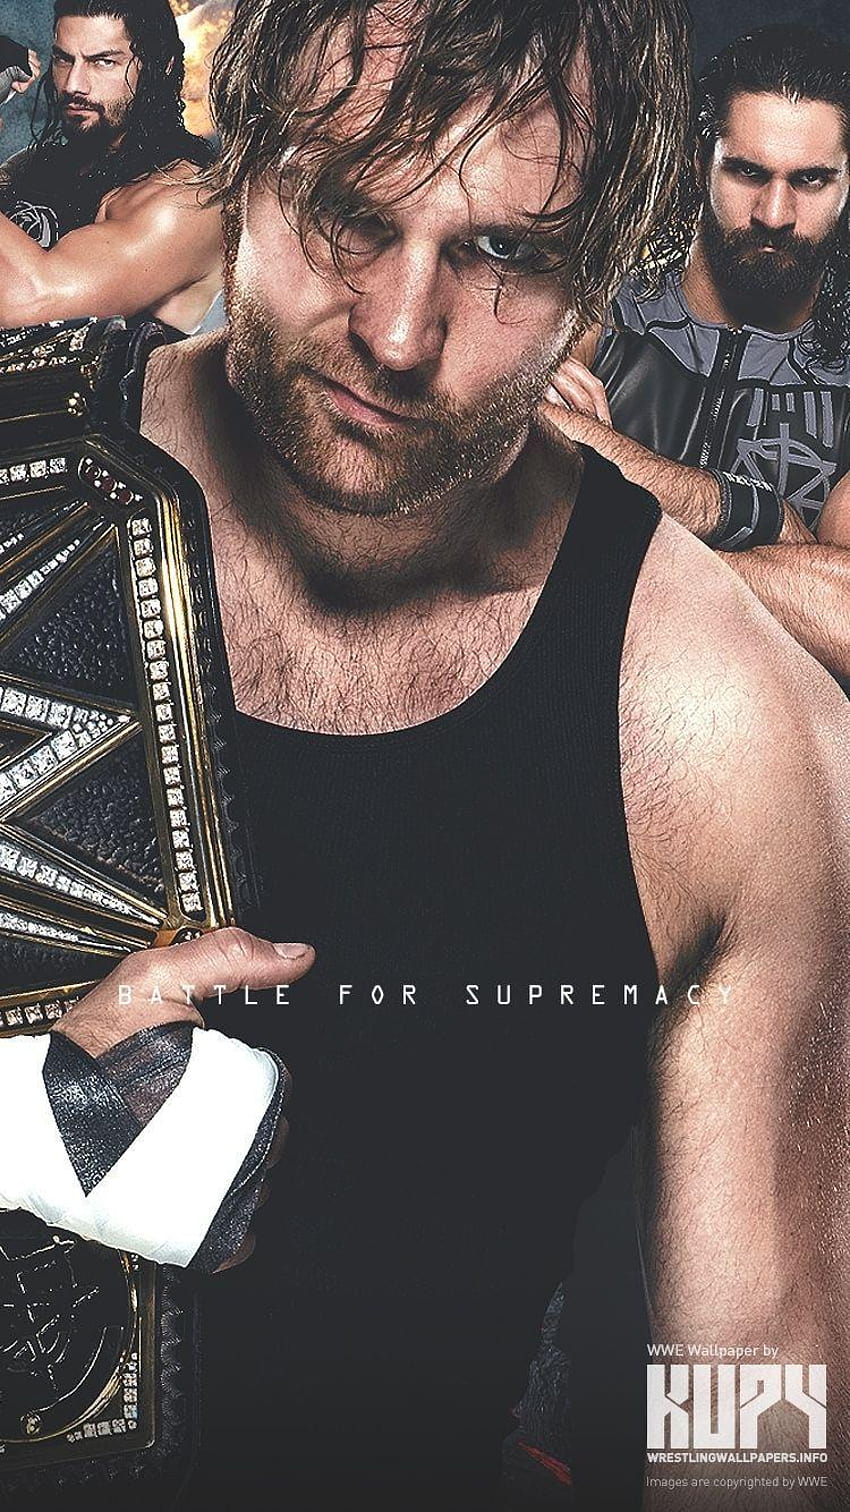 WWE HD Wallpapers for Desktop iPhone iPad and Android